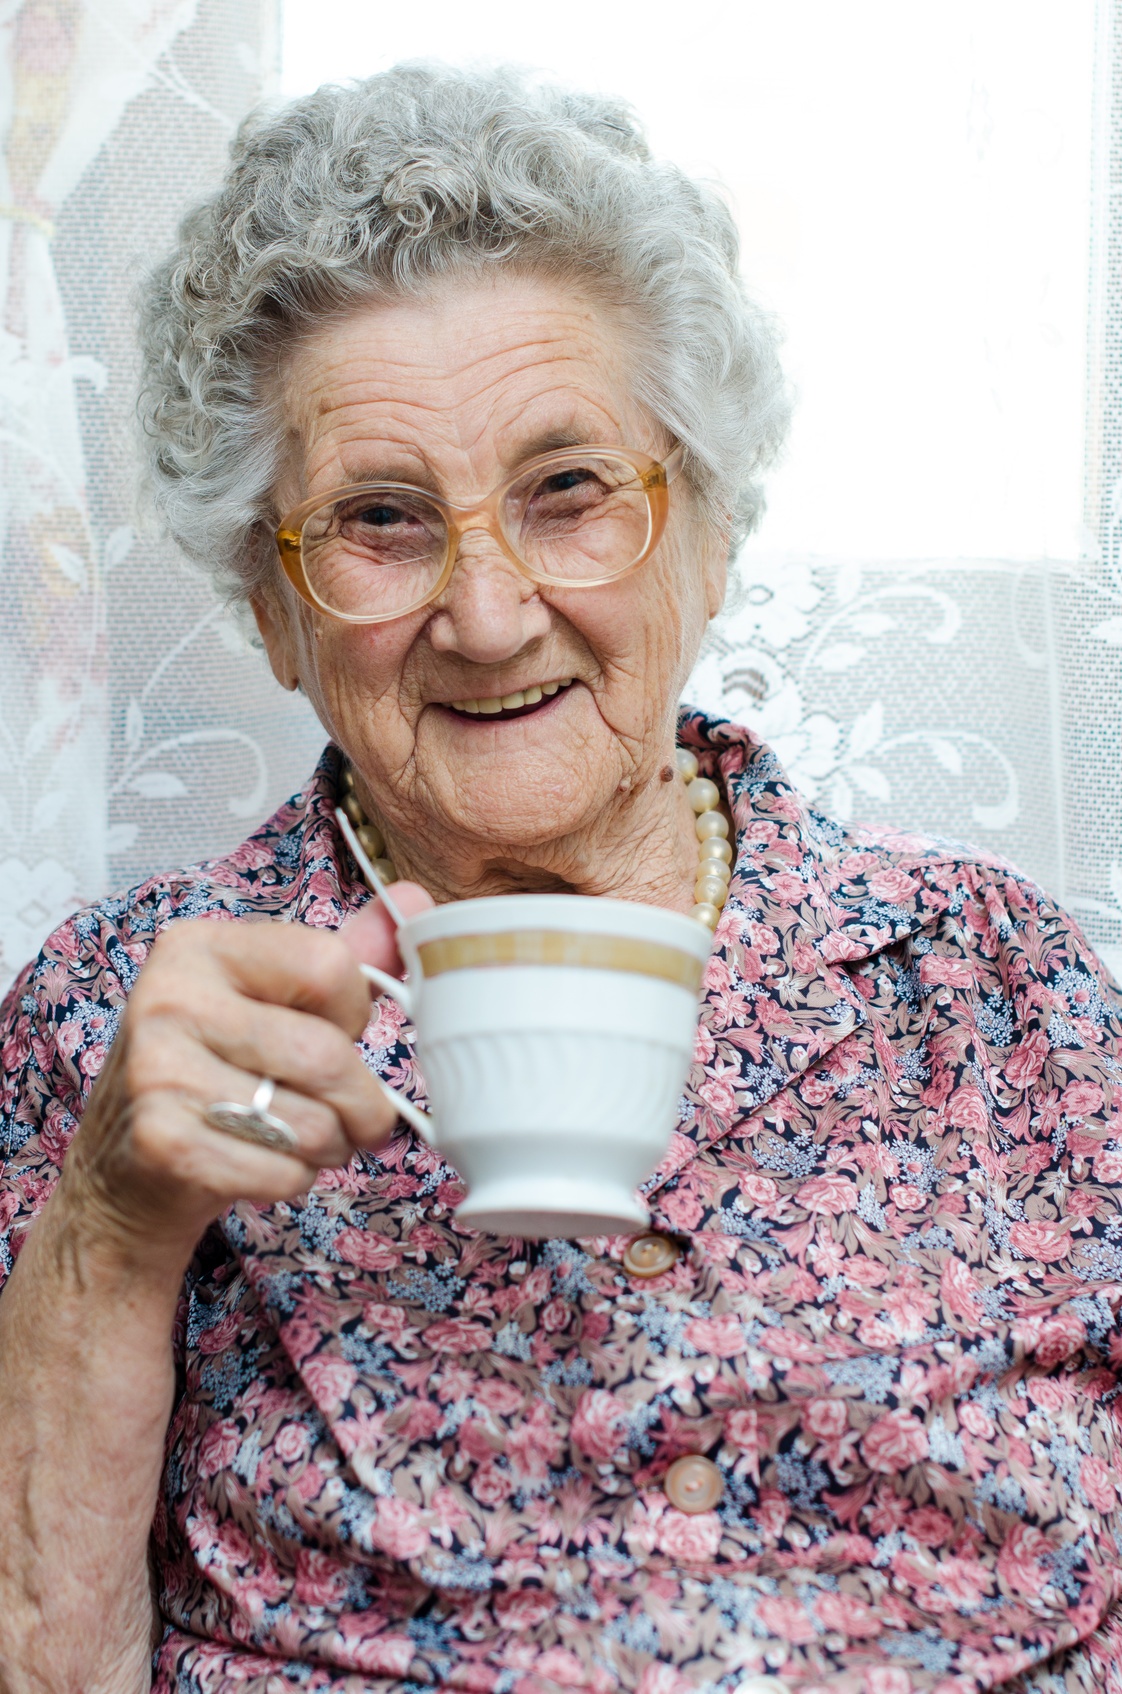 Old Lady Holding a Cup